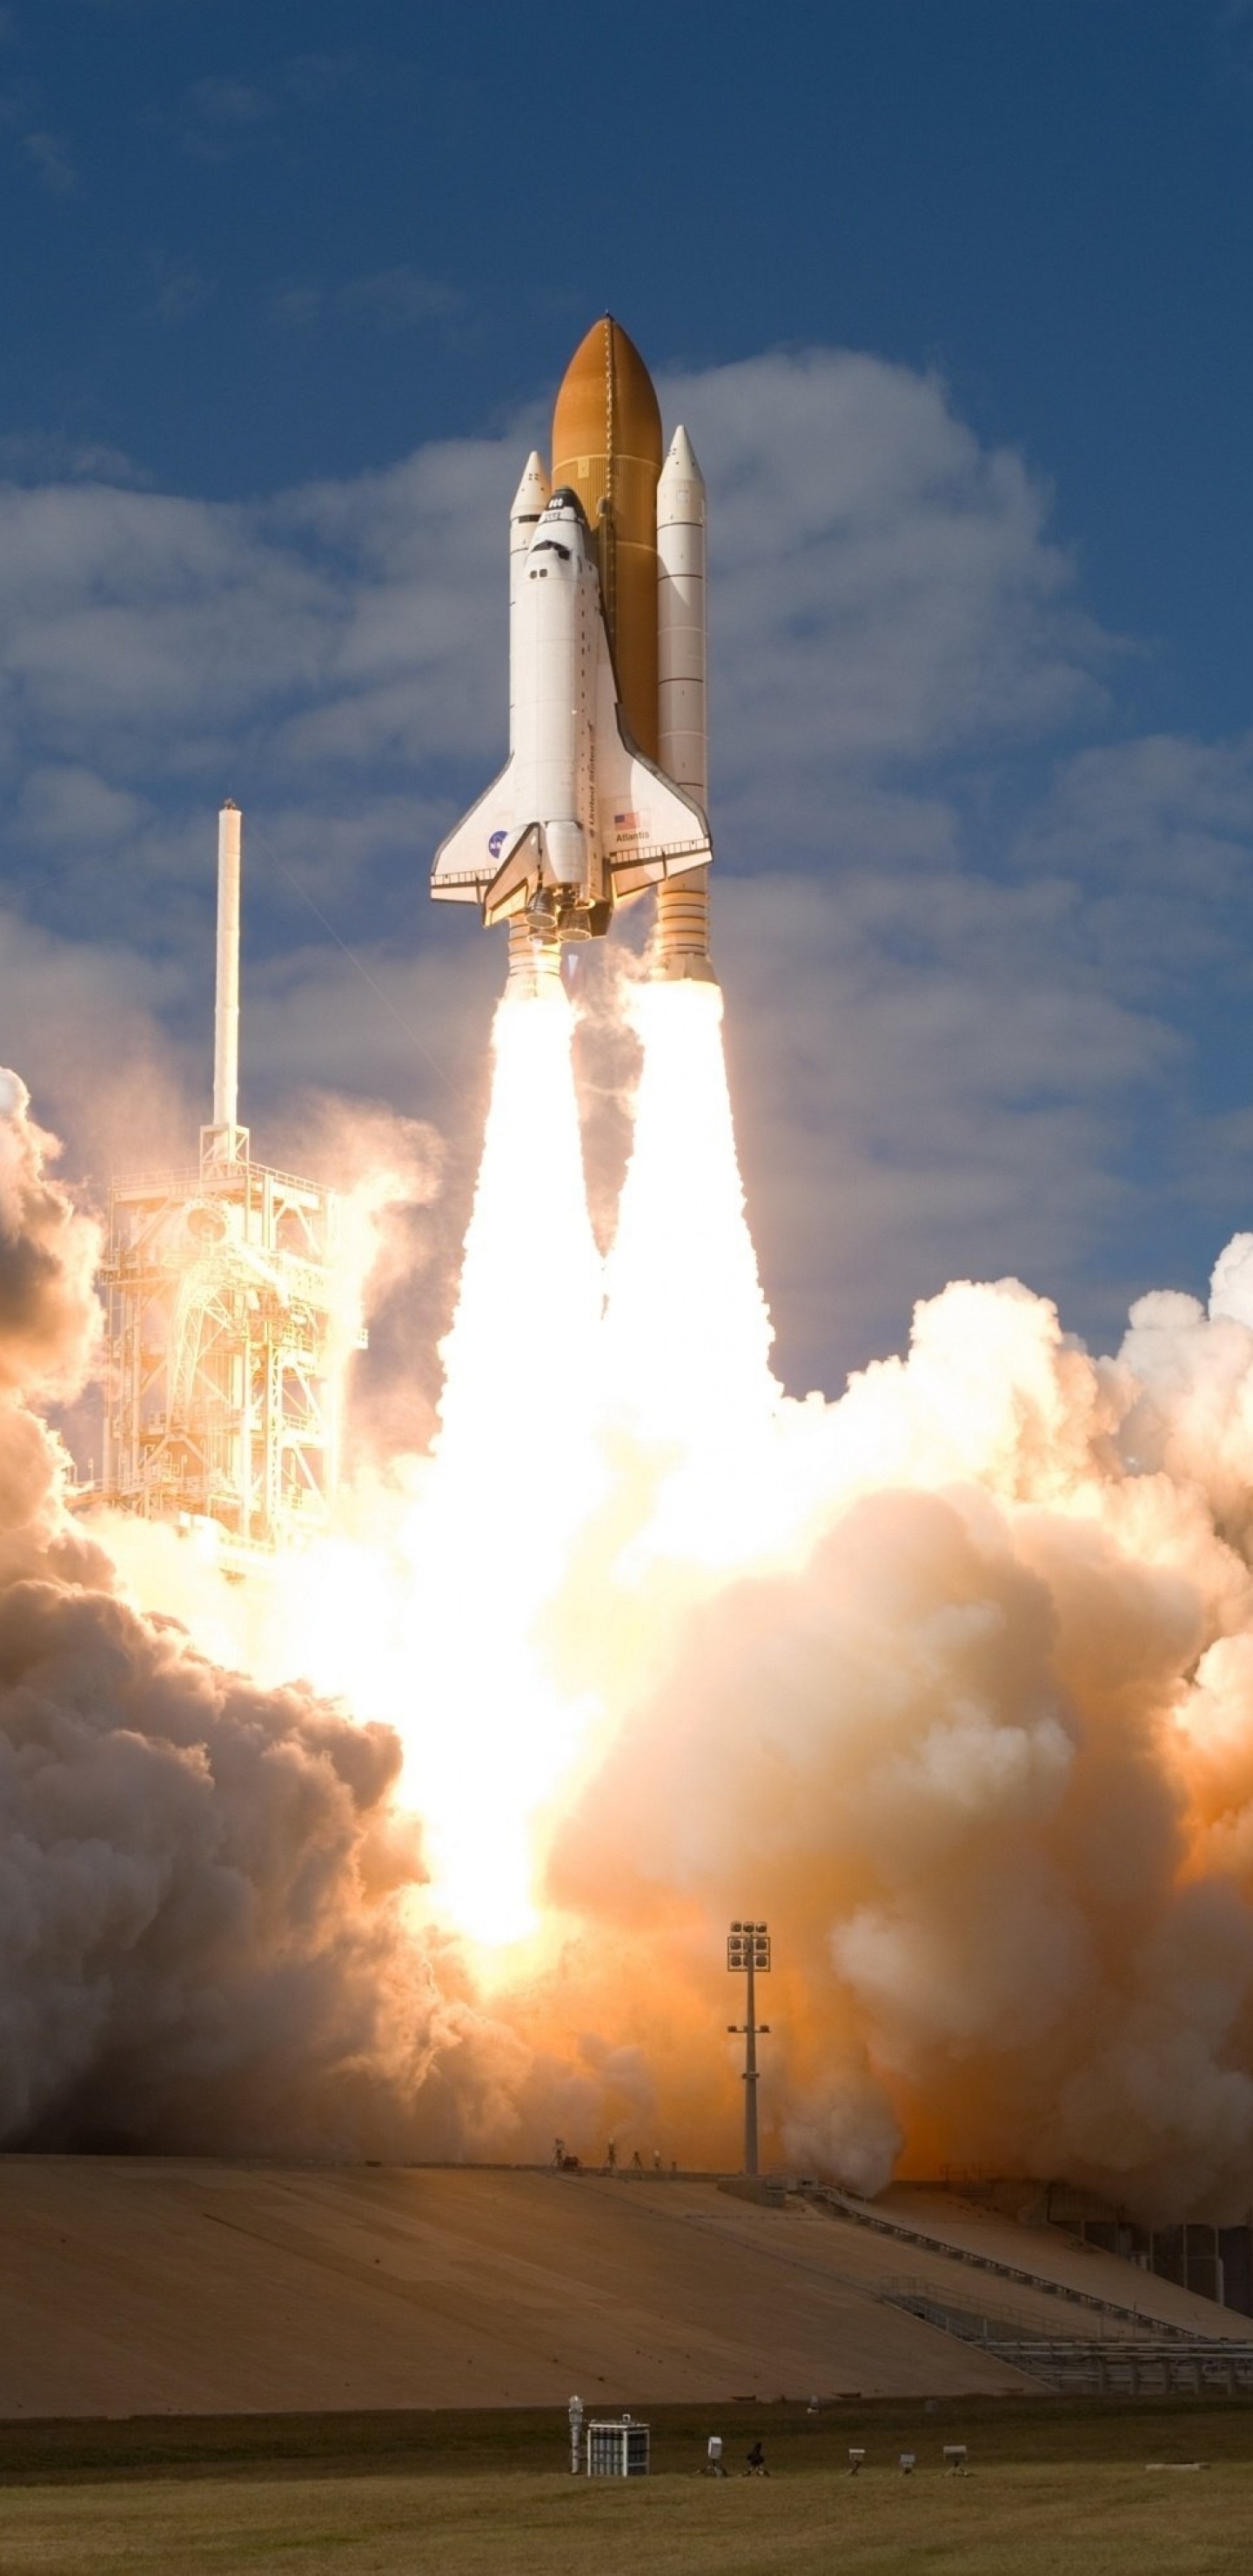 launch wallpaper,rocket,missile,space shuttle,spacecraft,aerospace engineering